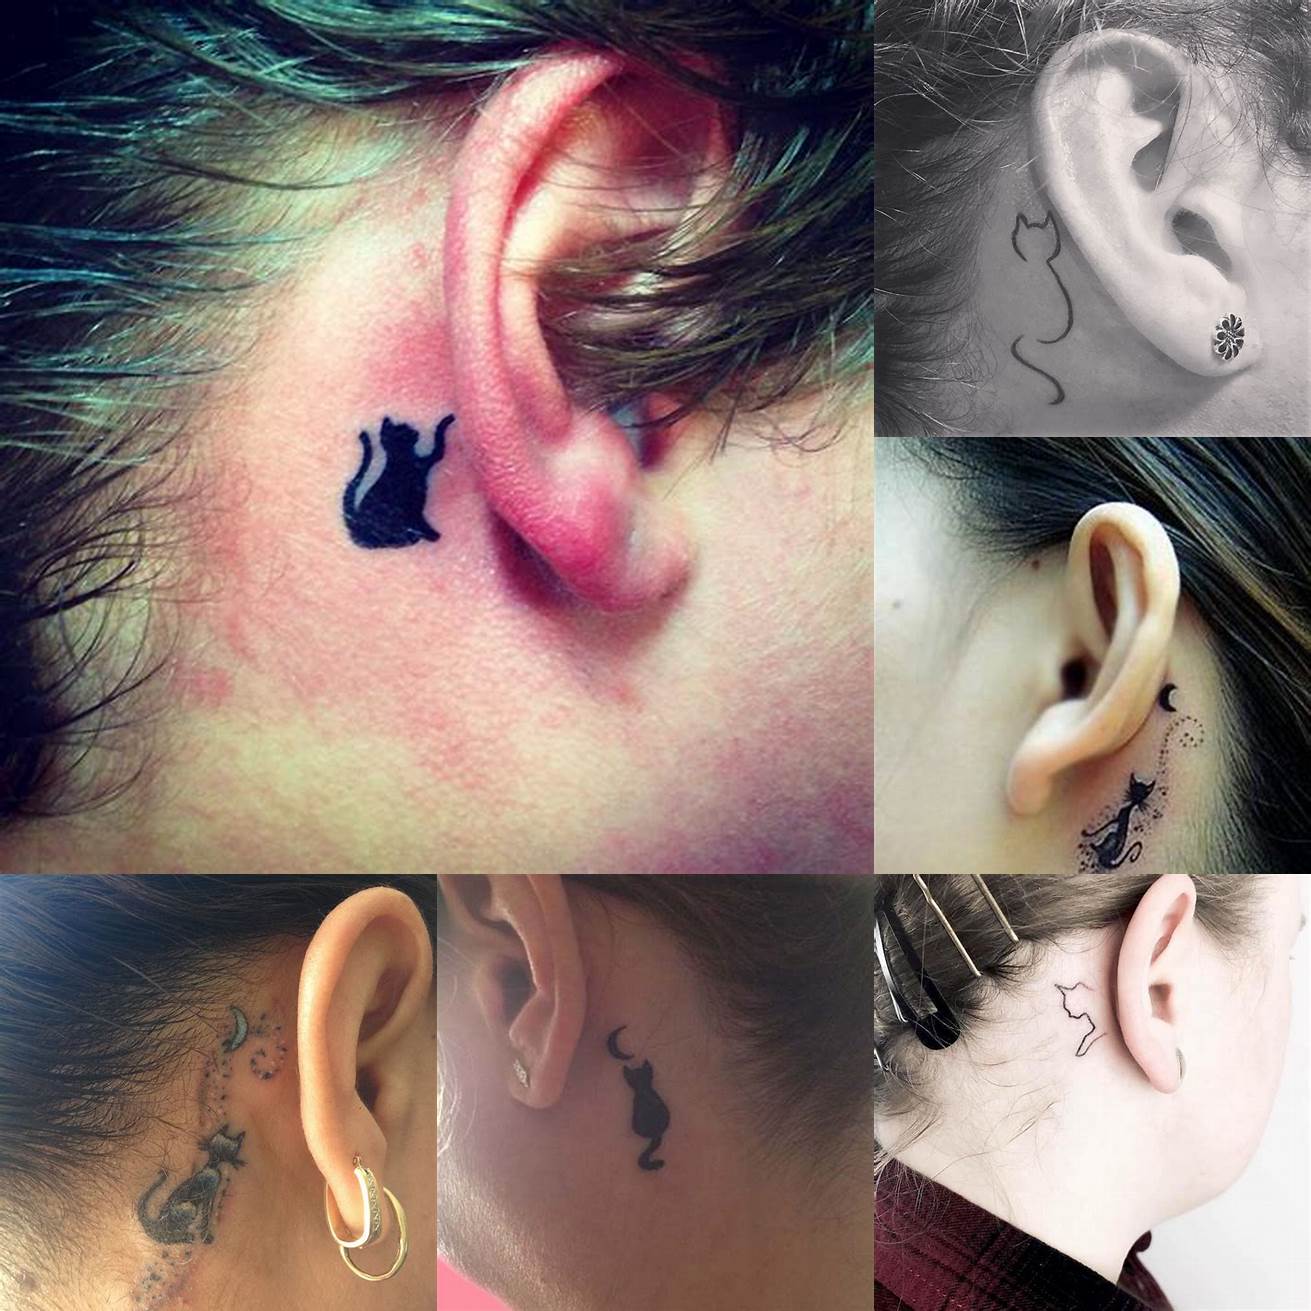 A cat behind the ear tattoo is a great first tattoo